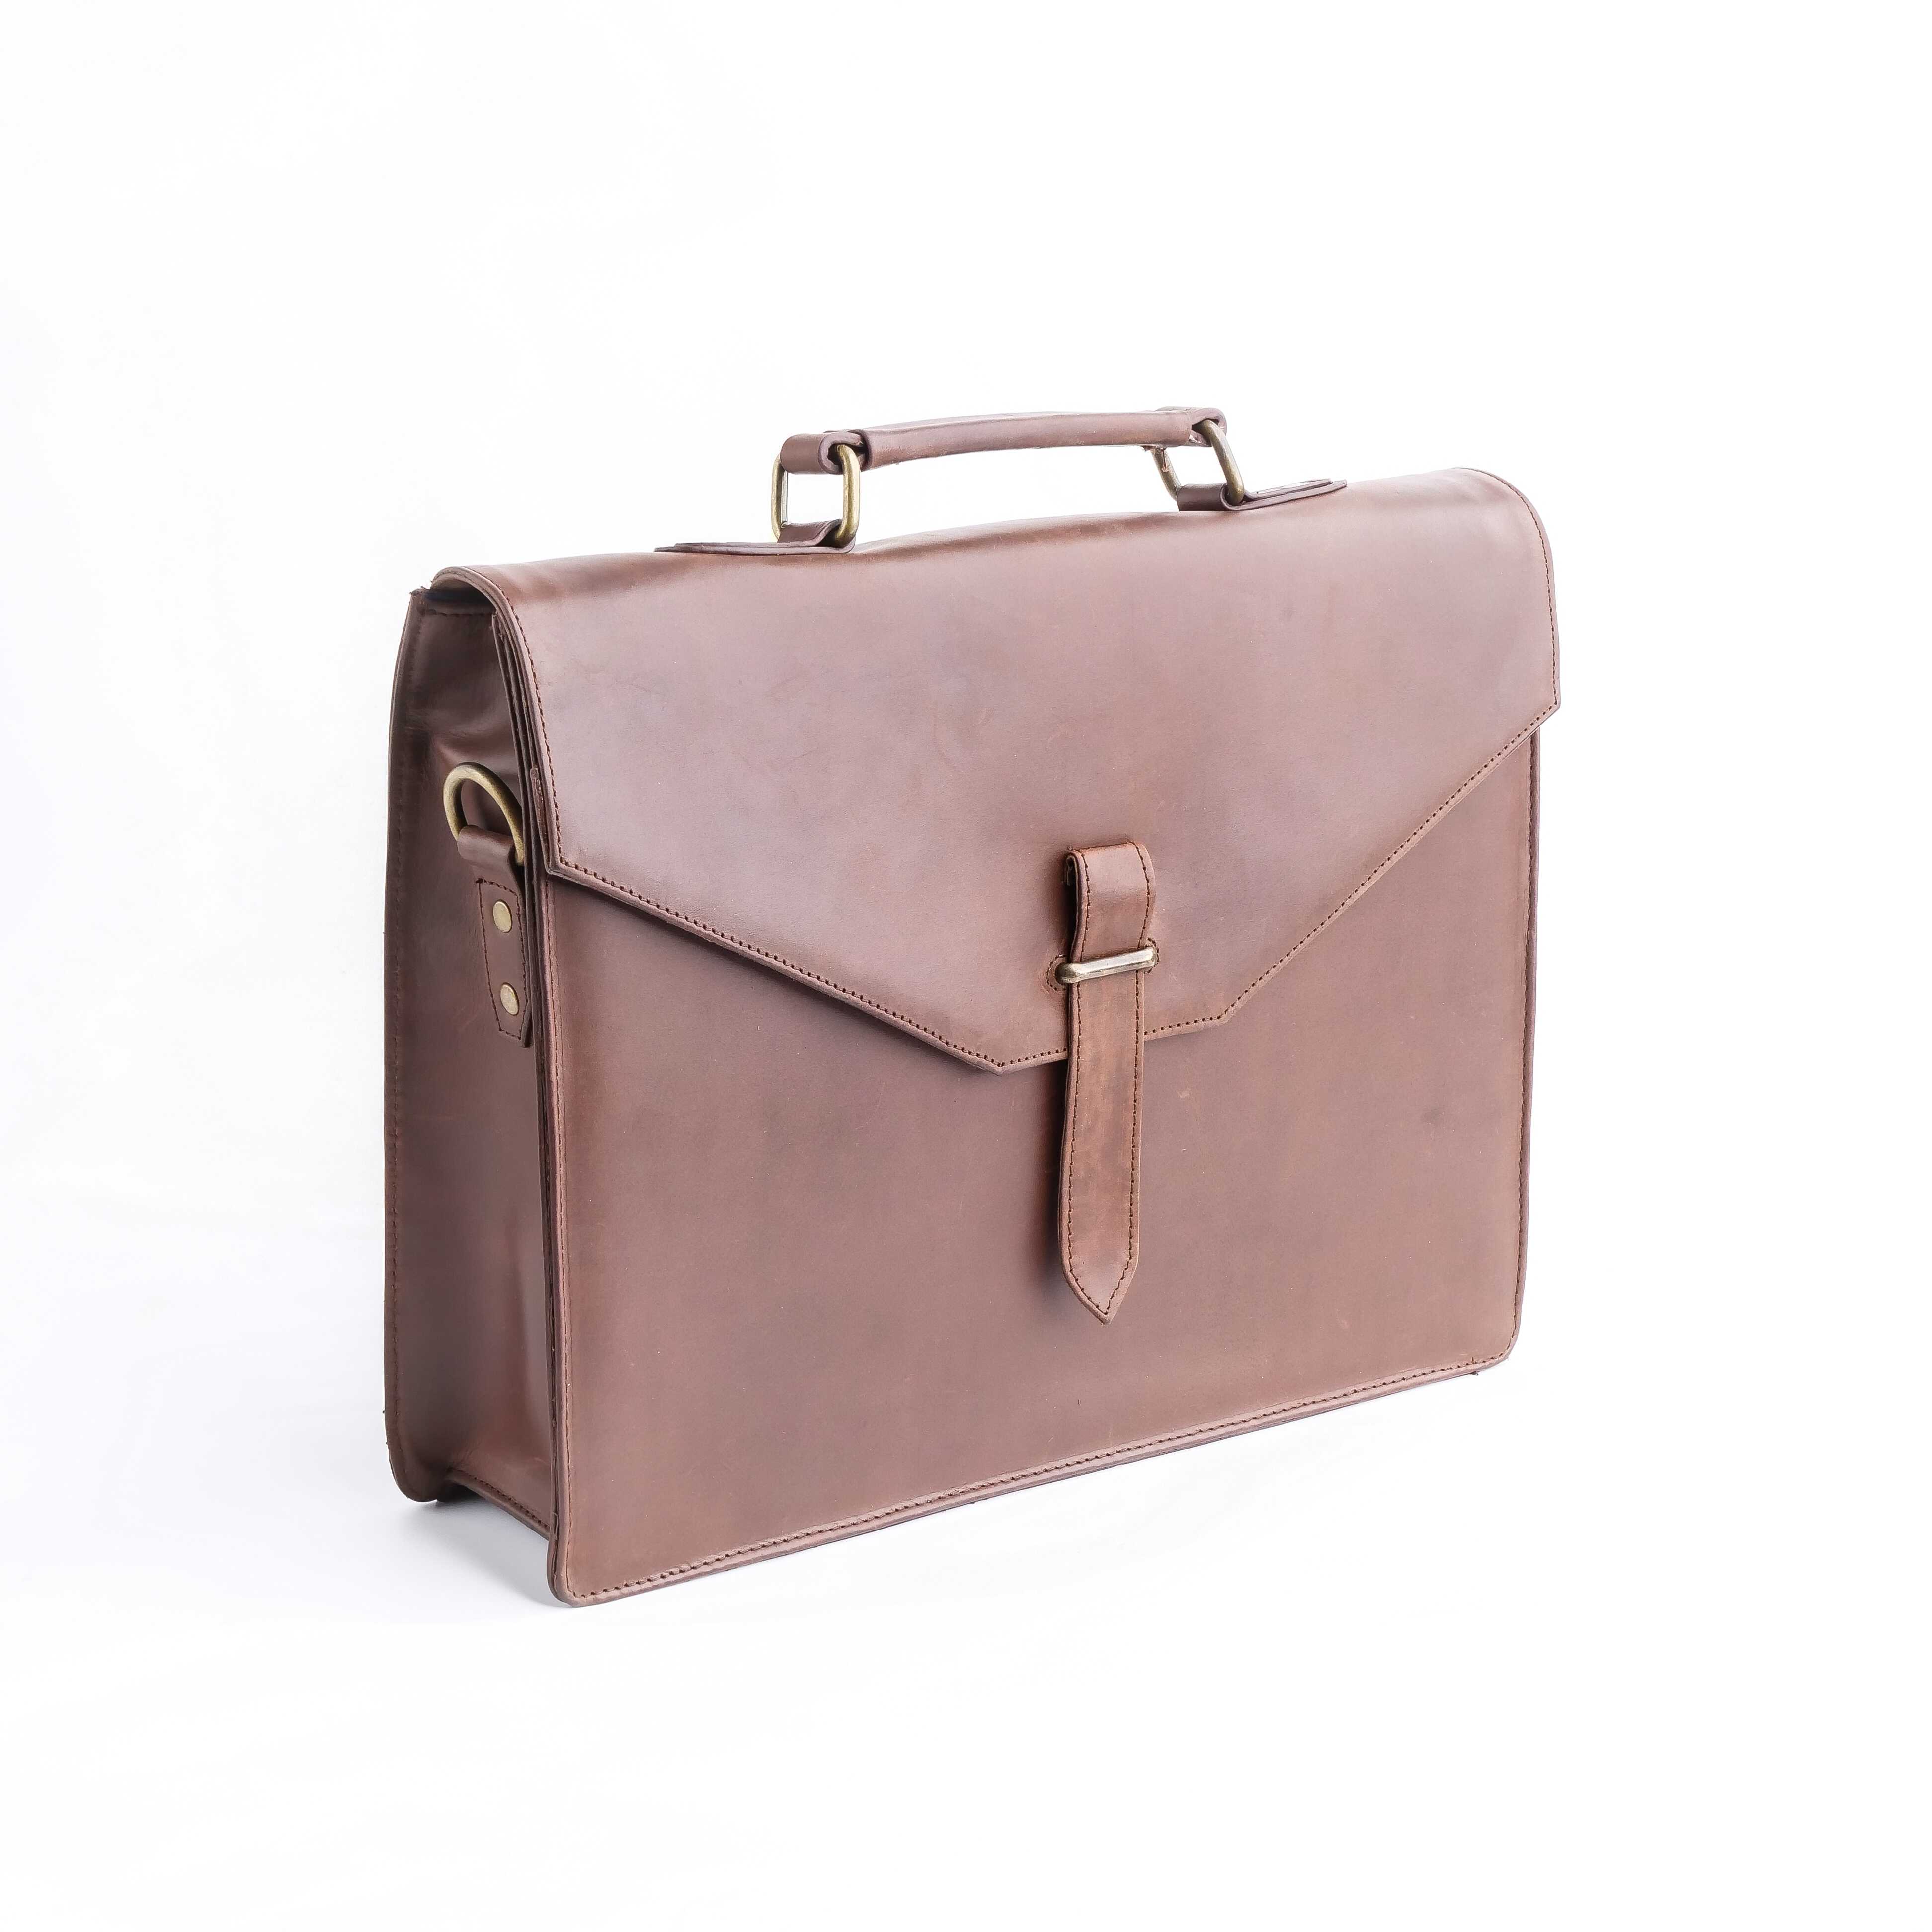 The Corporate Pure Leather Bag- Tan Brown